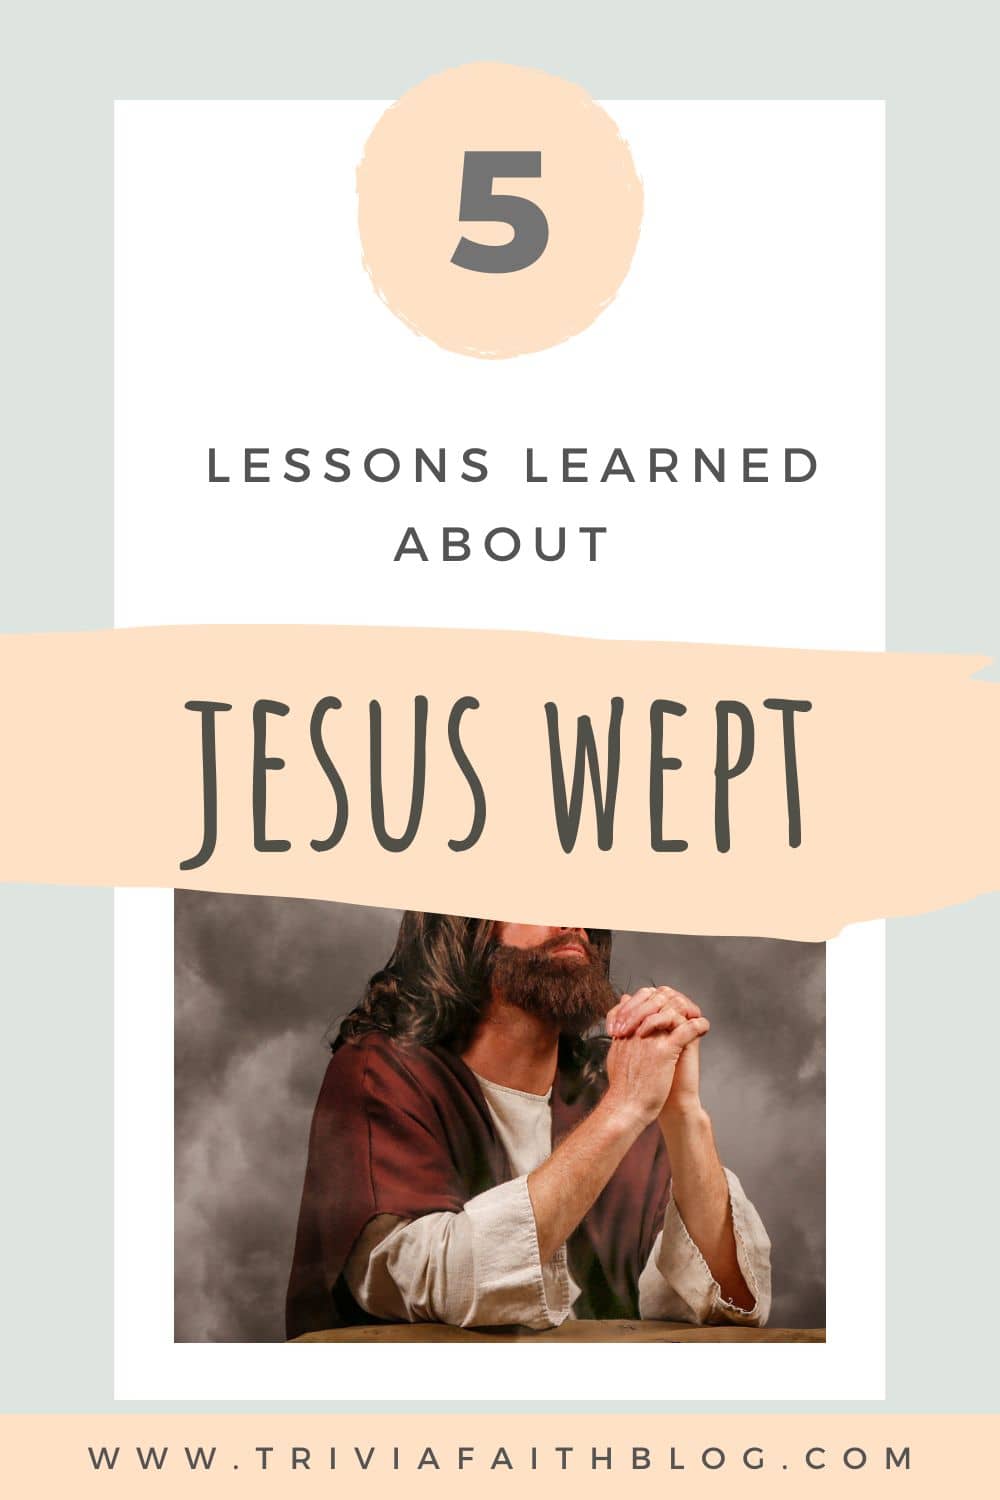 Lessons learned about Jesus wept